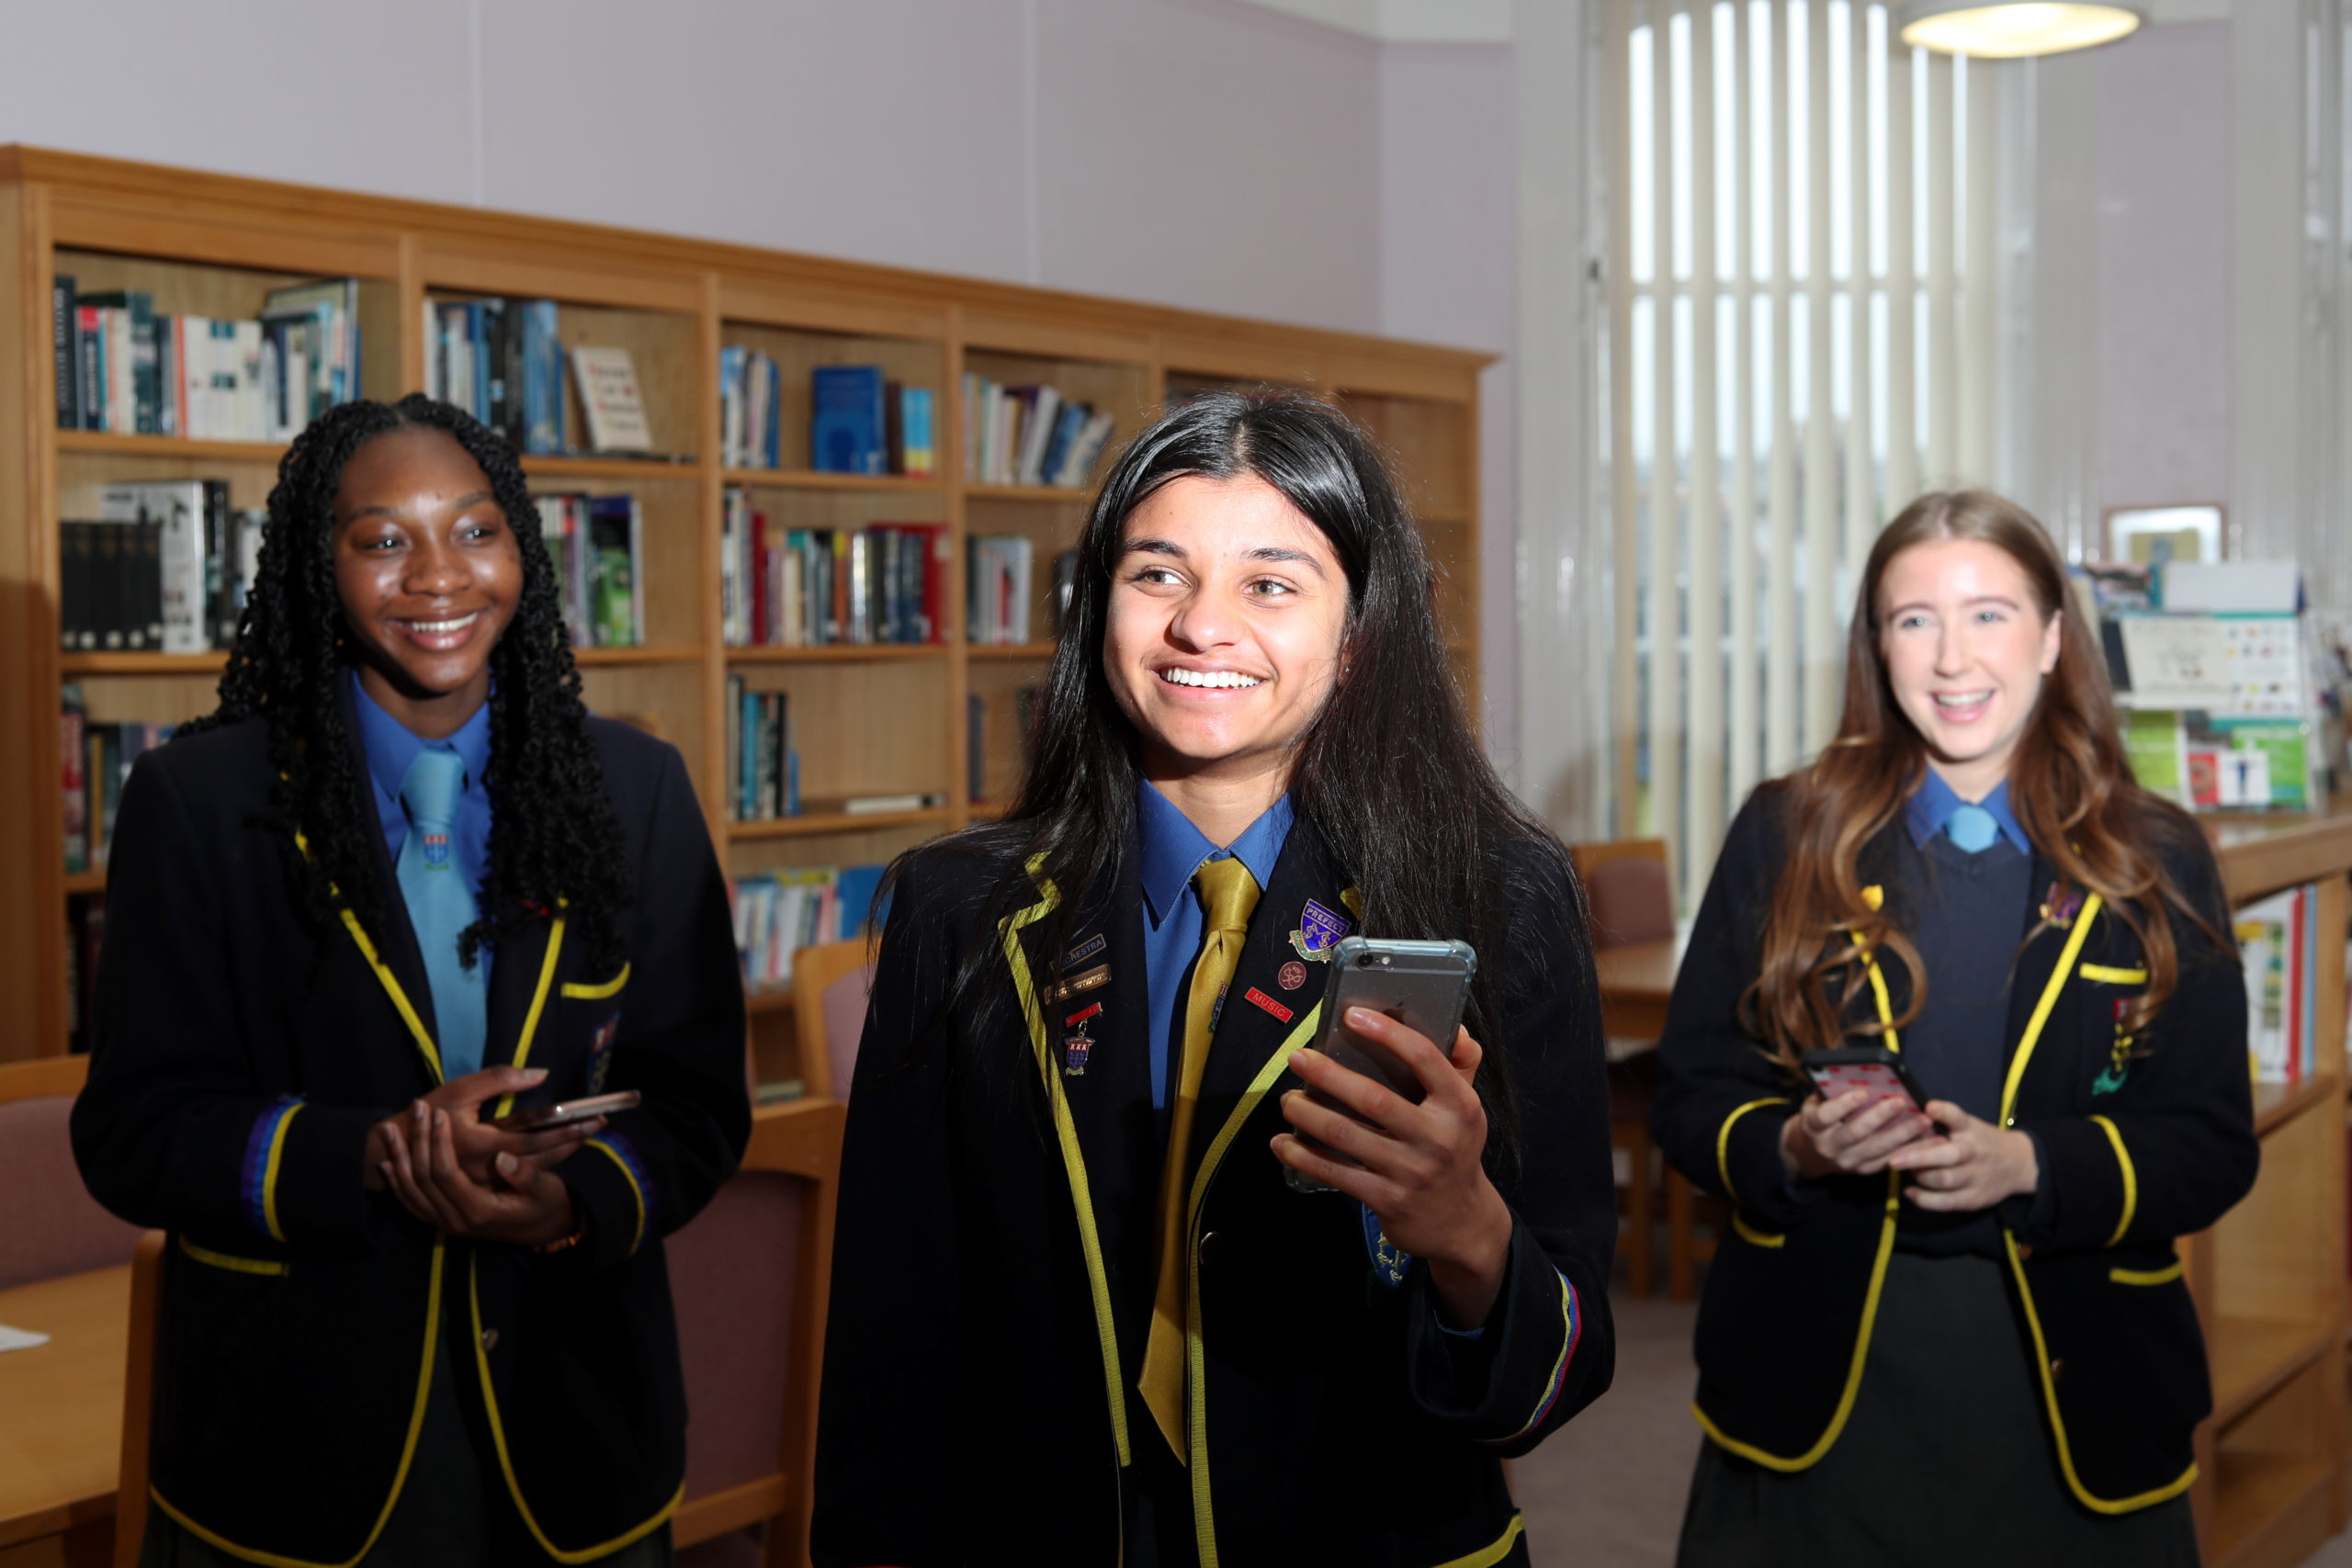 St Margaret's School For Girls pupils (left to right) Oluwatofunmi Adenuga, Janani Mohan and Caitlin O'Byrne looking over their results in the school library.
Picture by Scott Baxter.